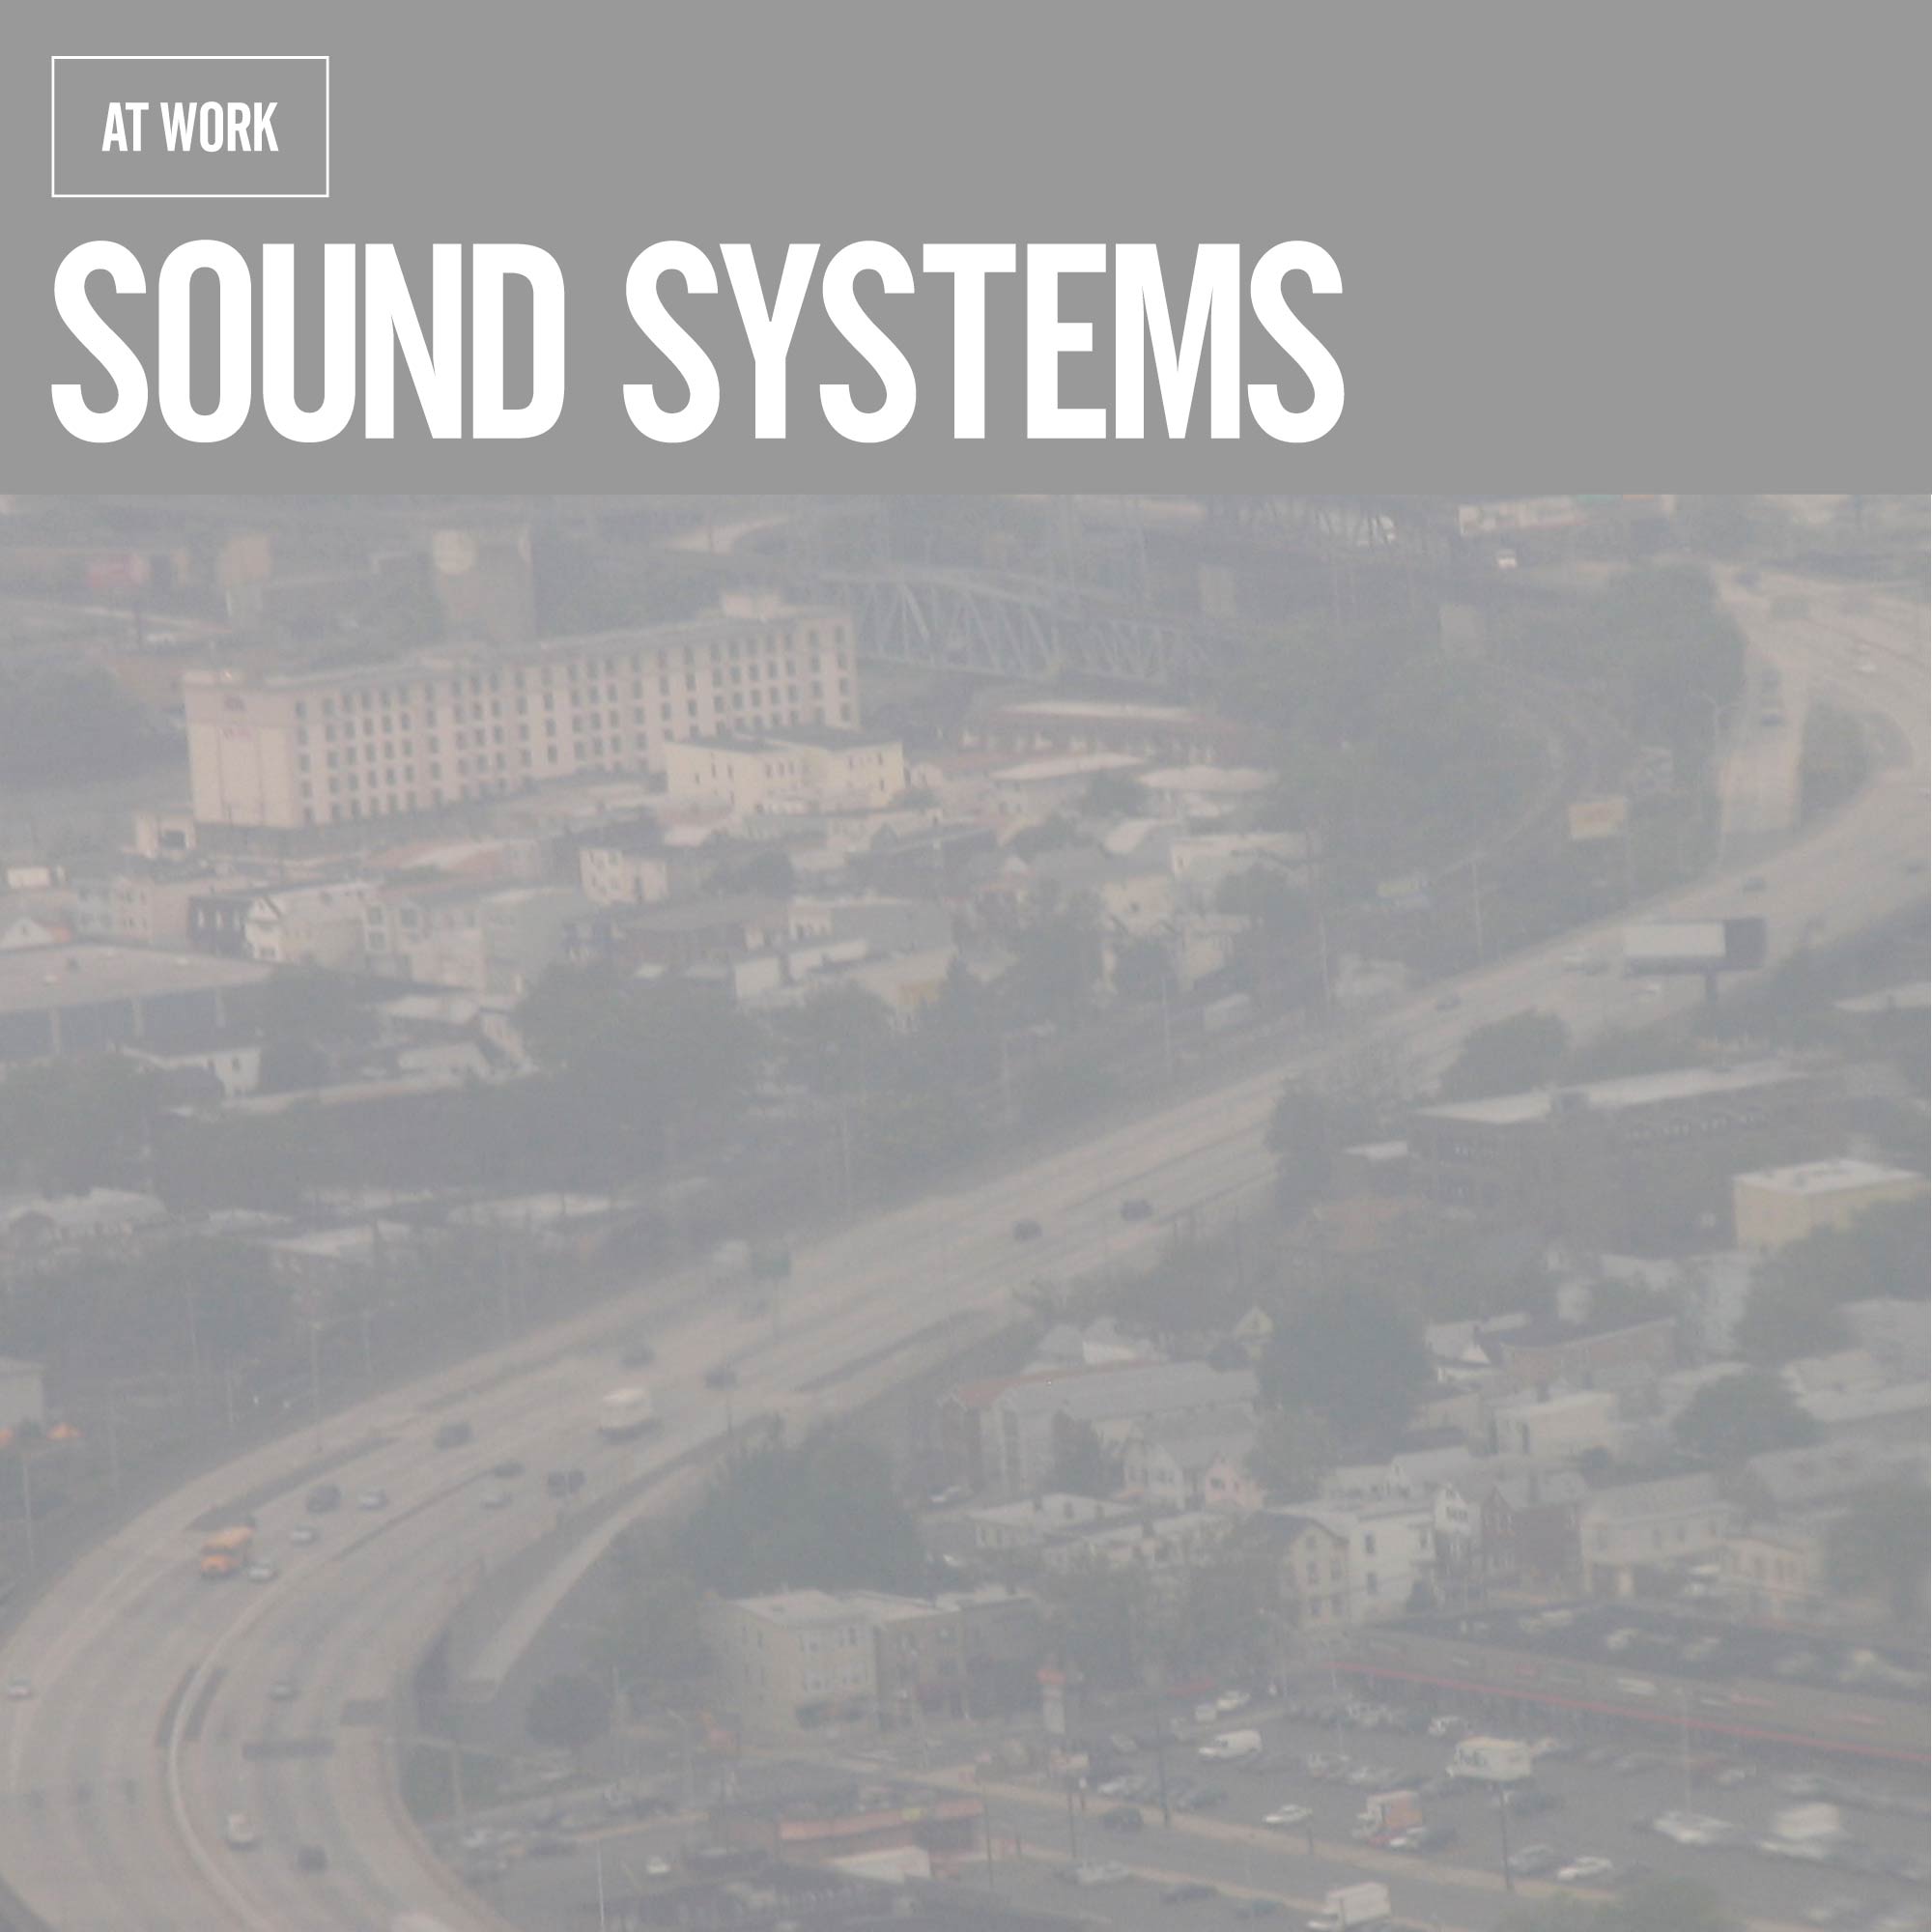 At Work - "Sound Systems" - PATH22